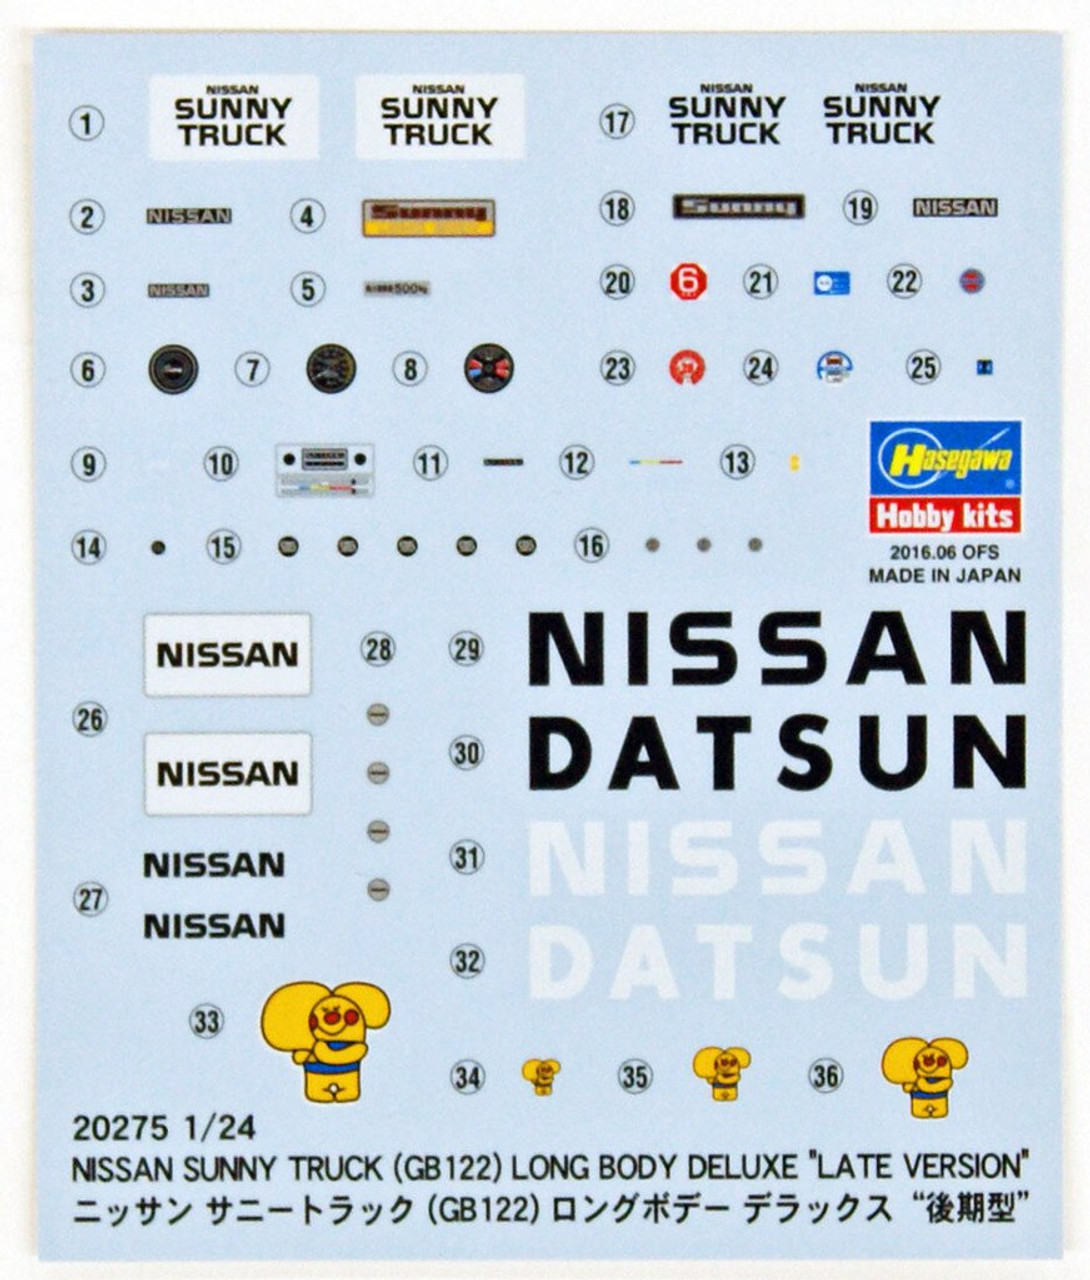 Hasegawa 1/24 Nissan Sunny Truck Long Body Deluxe Late Version 20275